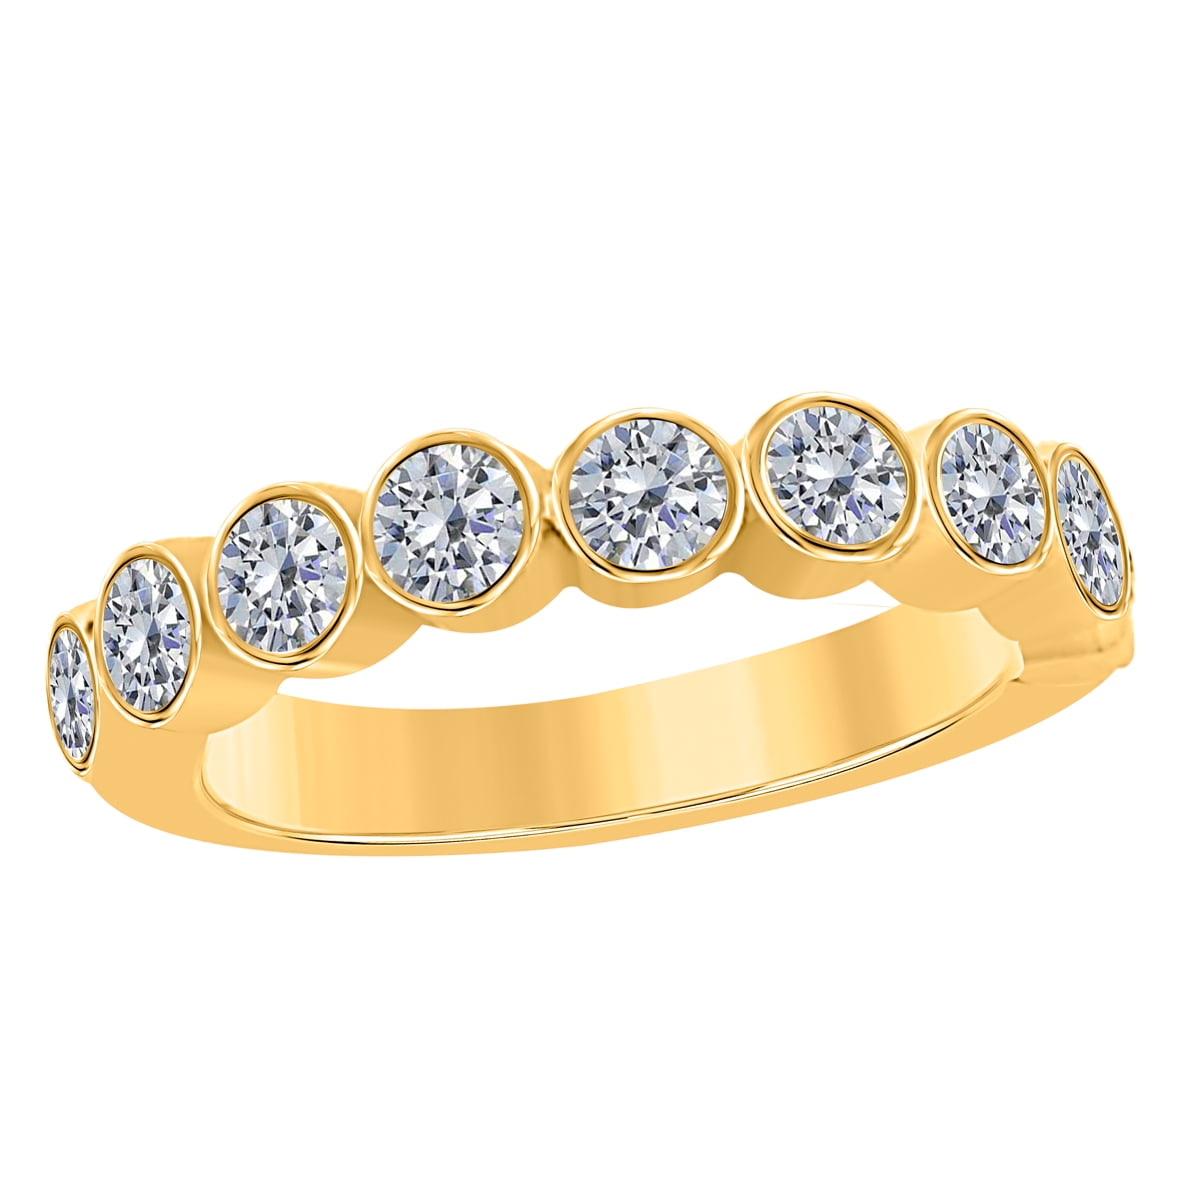 Buy MALABAR GOLD AND DIAMONDS Womens Mine Diamond Ring - Size 9 | Shoppers  Stop